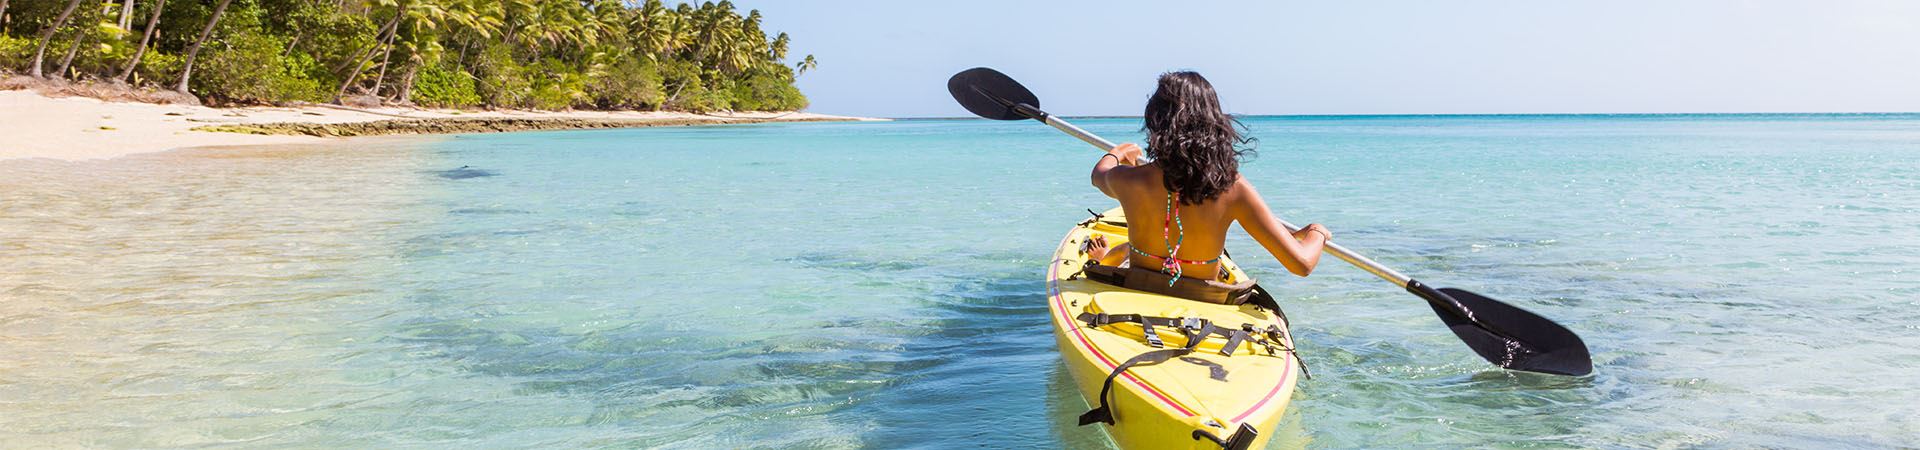 This picture shows a girl riding a canoe in the sea, seen from behind. The canoe is yellow and the background consists of sand and some vegetation, suggesting it is close to the beach.